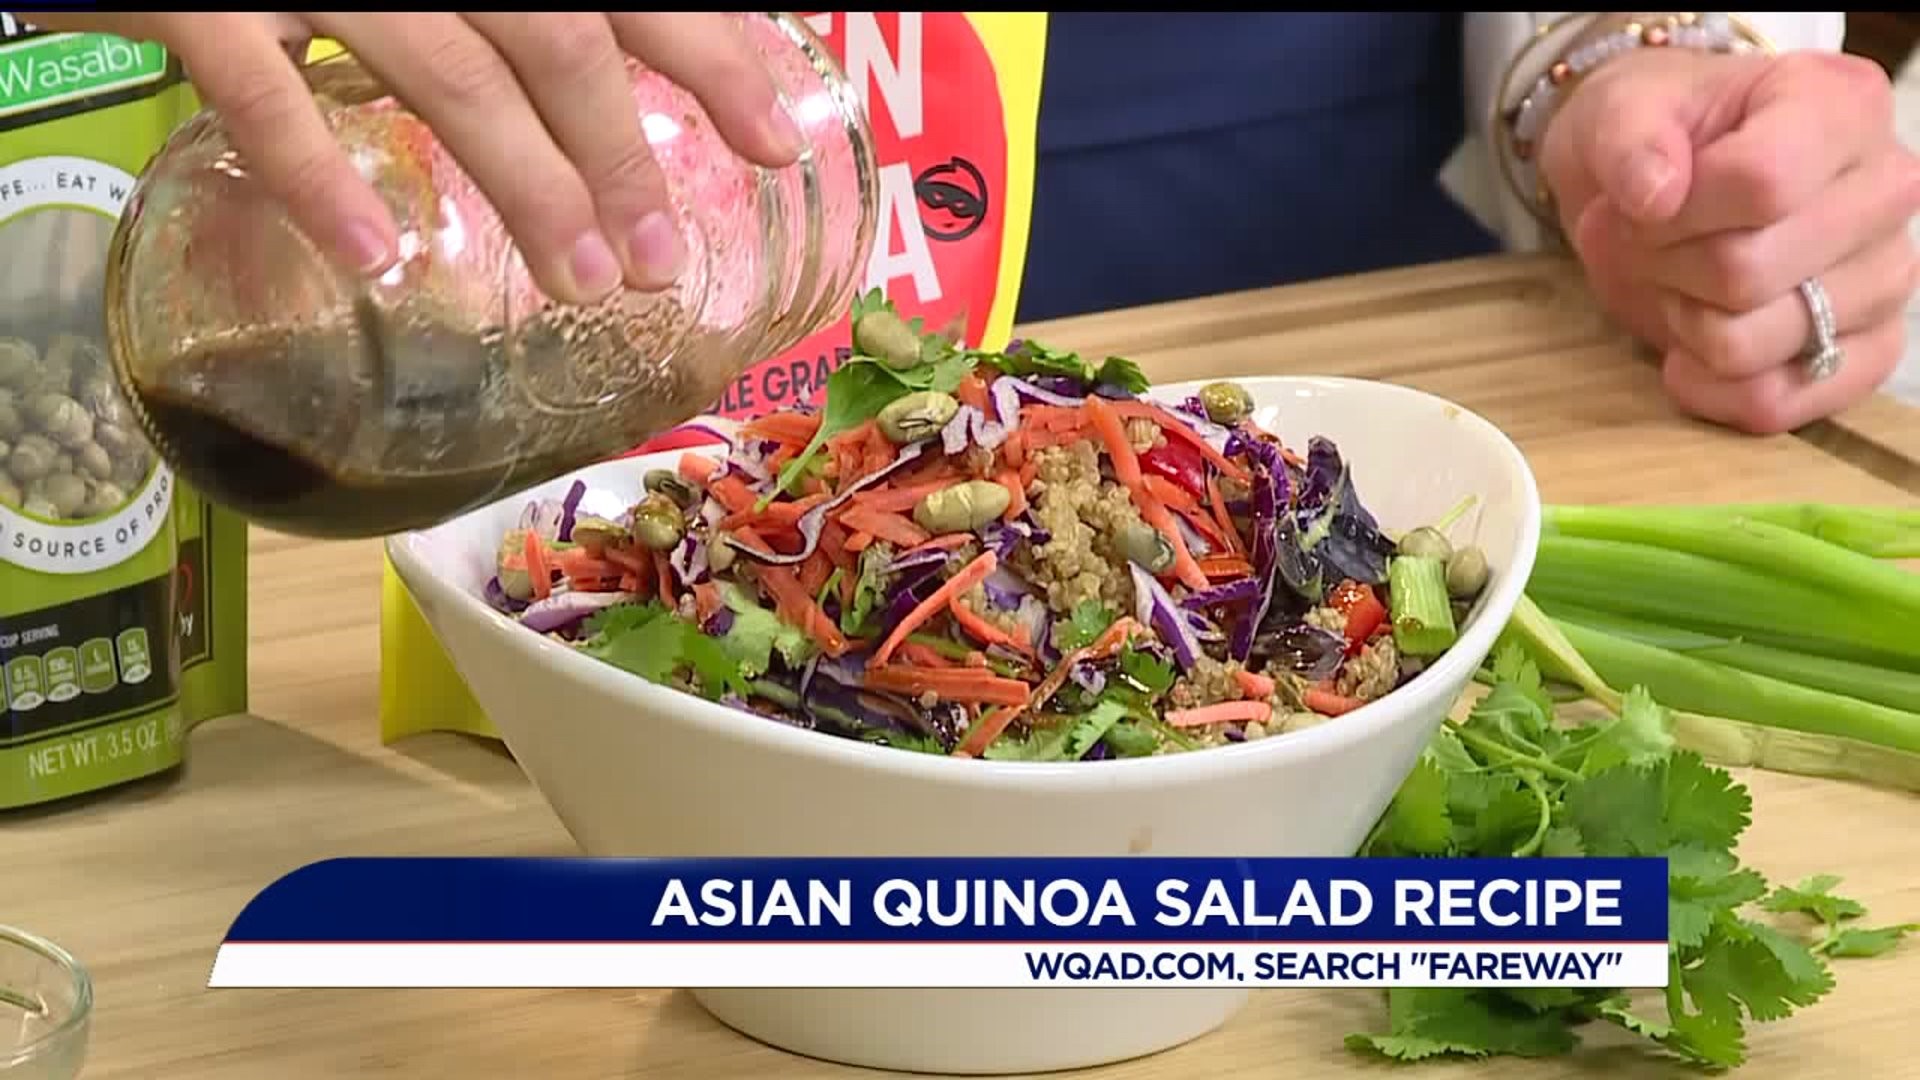 In the Kitchen with Fareway: Asian Quinoa Salad